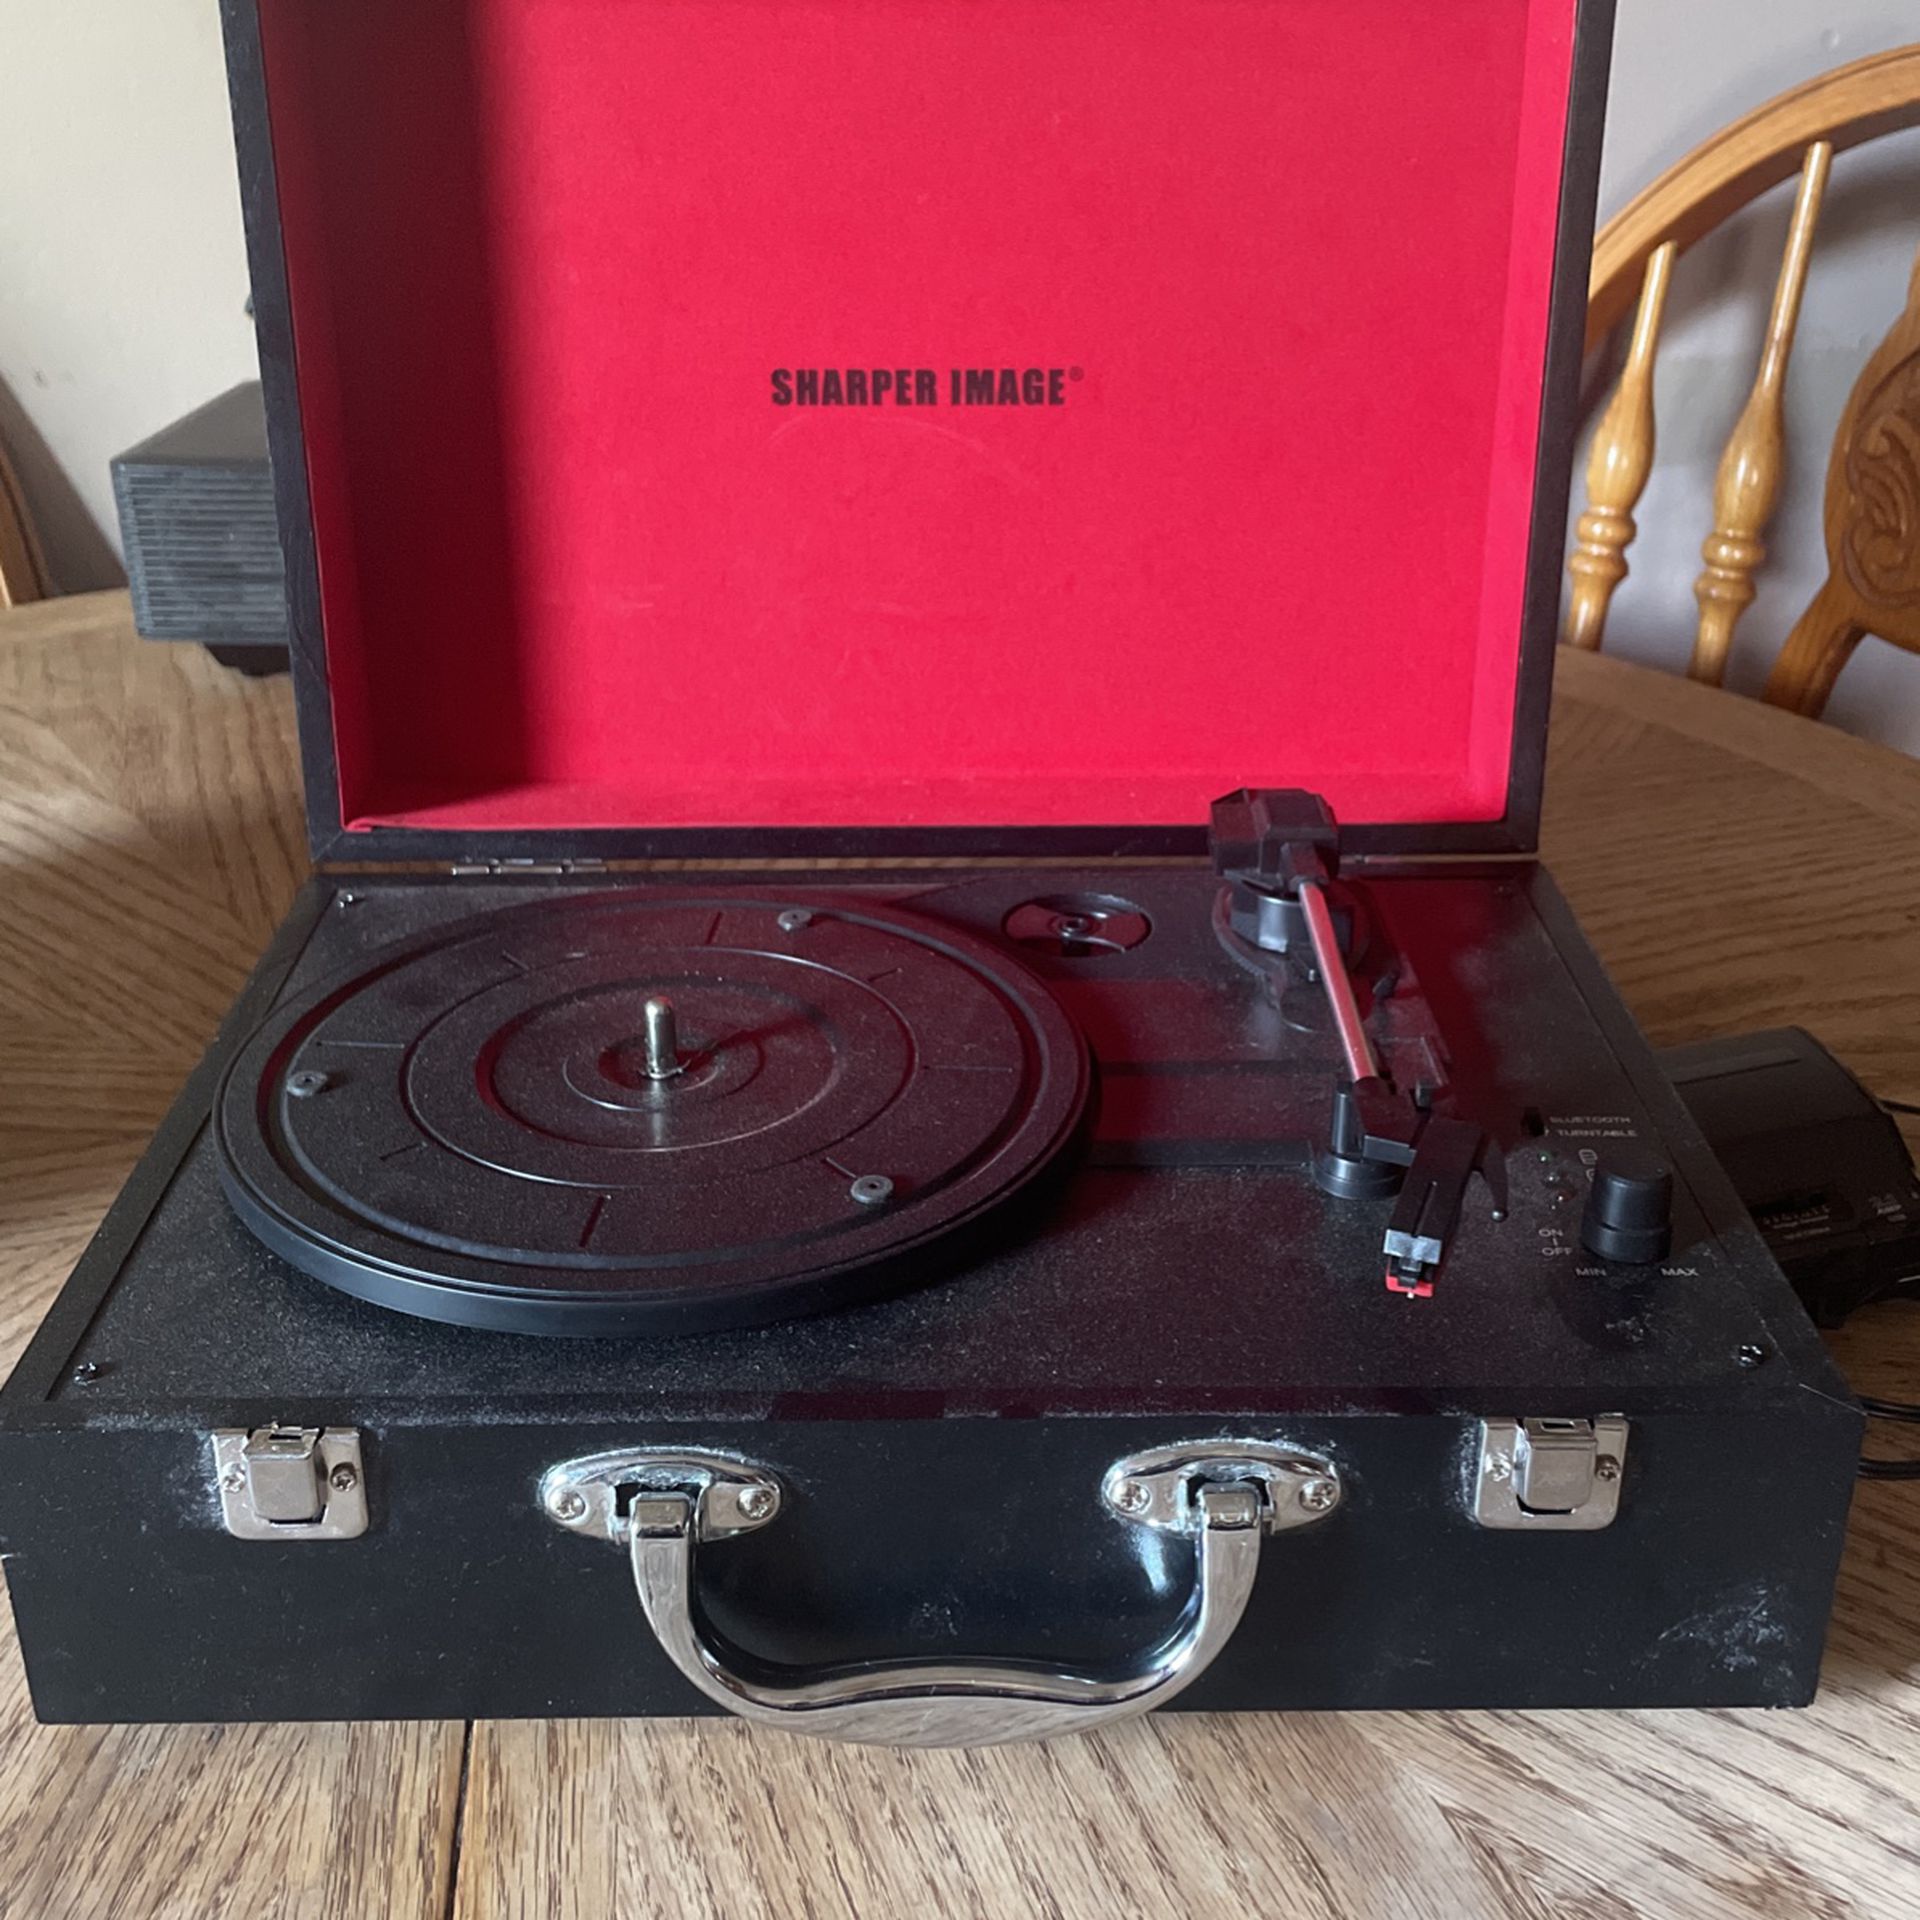 Sharper Image Bluetooth Turntable Great Shape Works Great 25.00